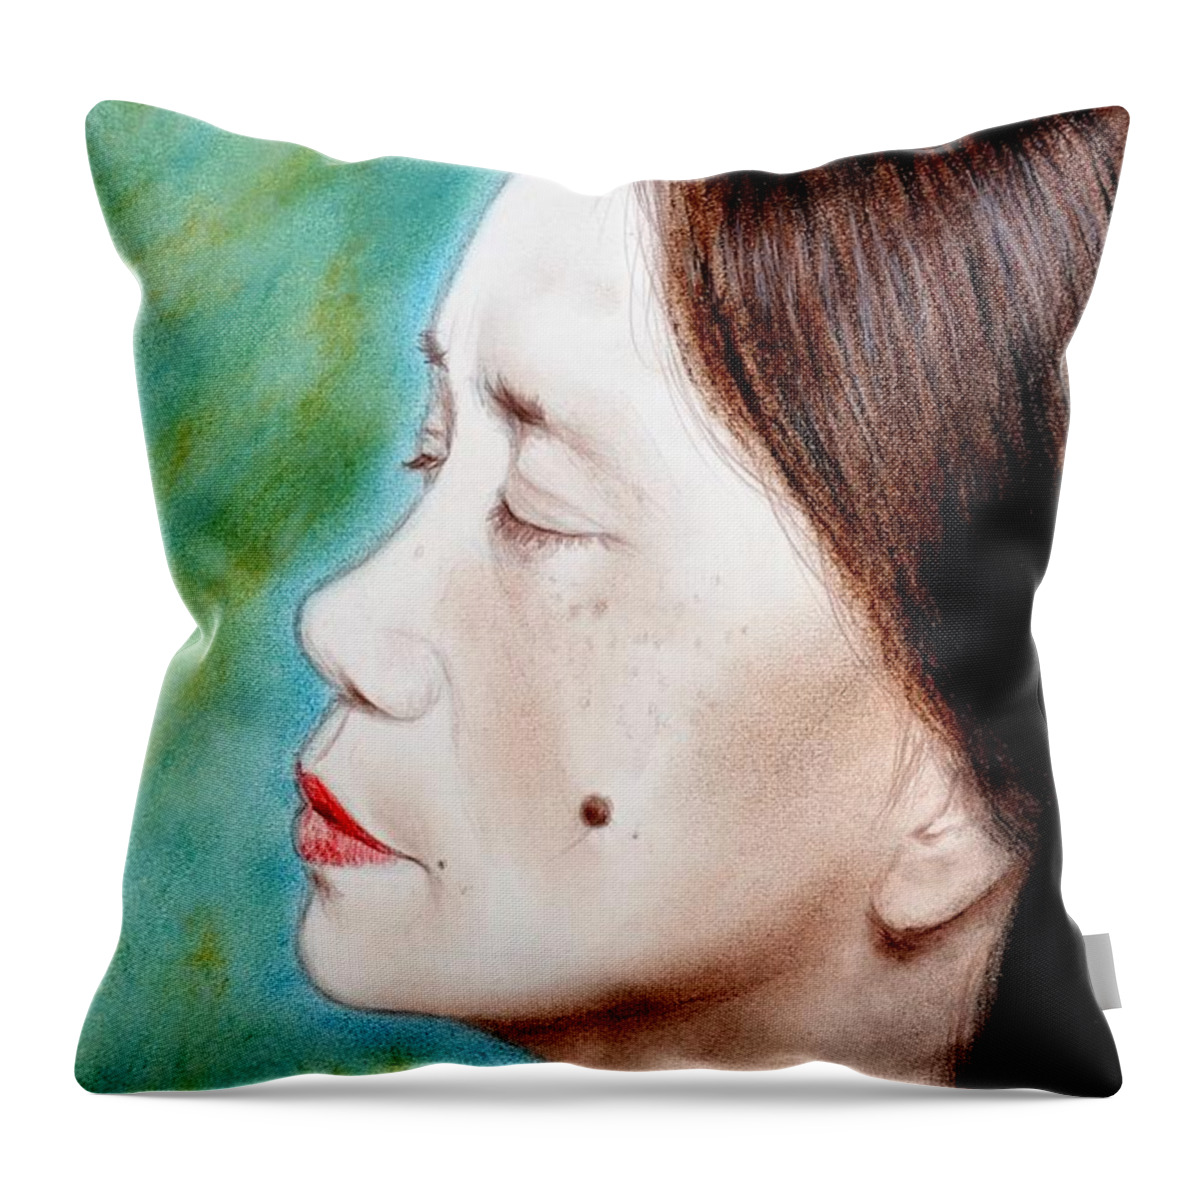 Filipina Beauty With A Mole On Her Cheek Throw Pillow featuring the drawing Profile of a Filipina Beauty with a mole on Her Cheek by Jim Fitzpatrick